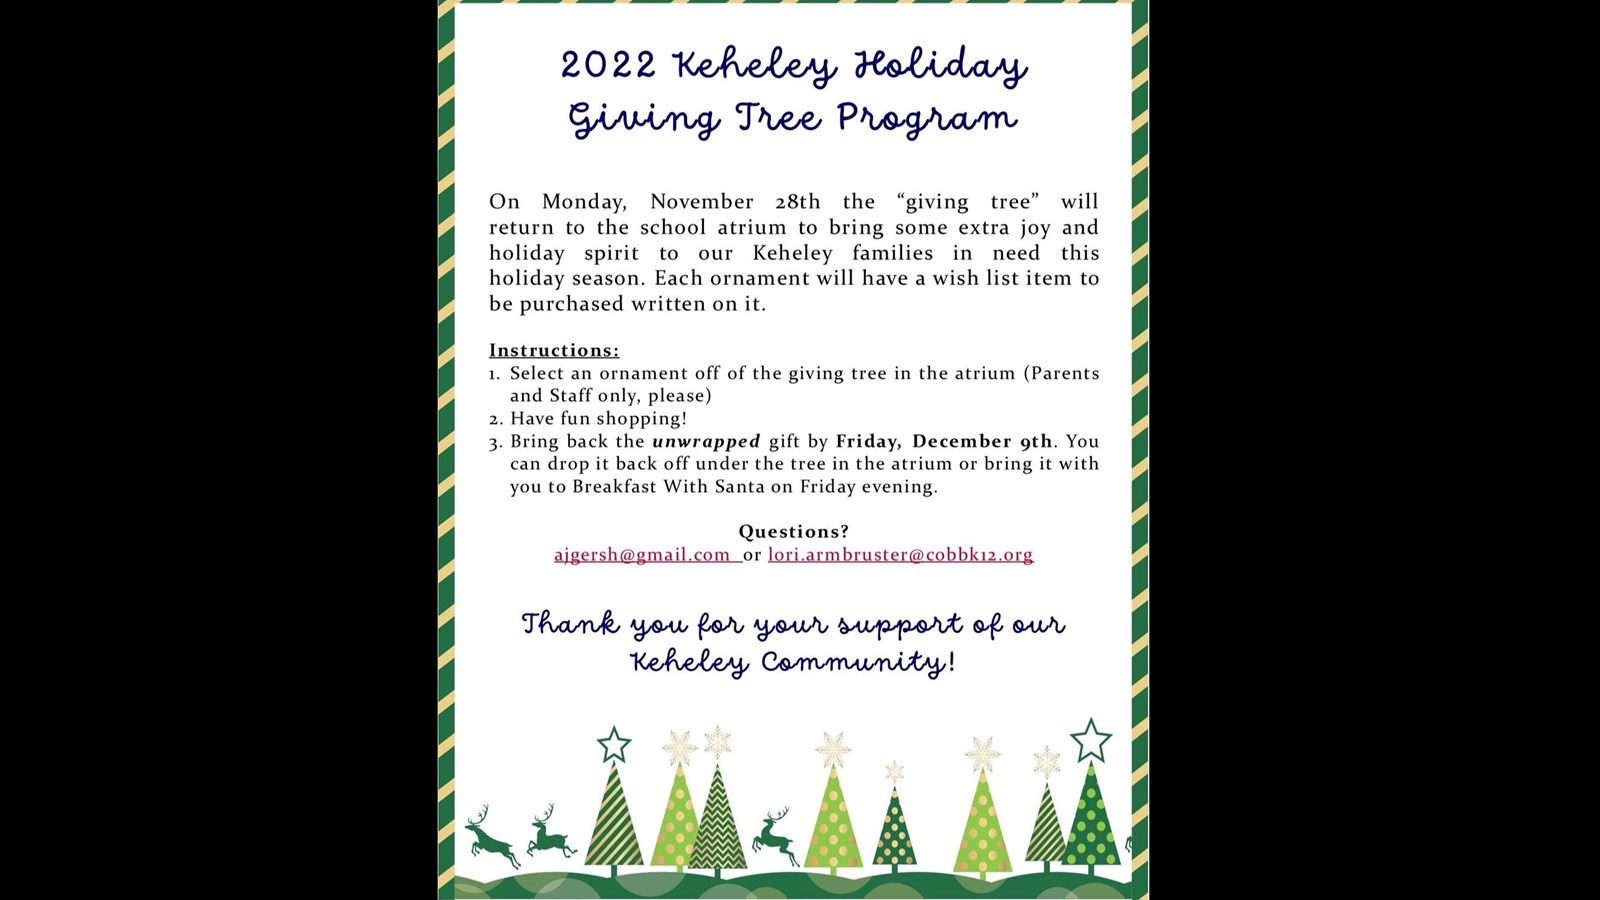 Christmas tree border with the following words: November 28- December 9: 2022 Keheley Holiday Giving Tree Program On Monday, November 28th the "giving tree" will return to the school atrium to bring some extra joy and holiday spirit to our Keheley families in need this holiday season. Each ornament will have a wish list item to be purchased written on it. Instructions: 1. Select an ornament off of the giving tree in the atrium (Parents and Staff only, please) 2. Have fun shopping! 3. Bring back the unwrapped gift by Friday, December 9th. You can drop it back off under the tree in the atrium or bring it with you to Breakfast With Santa on Friday evening. Questions? ajgersh@gmail.com_or lori.armbruster@cobbk12.org Thank you for your support of our Keheley community!